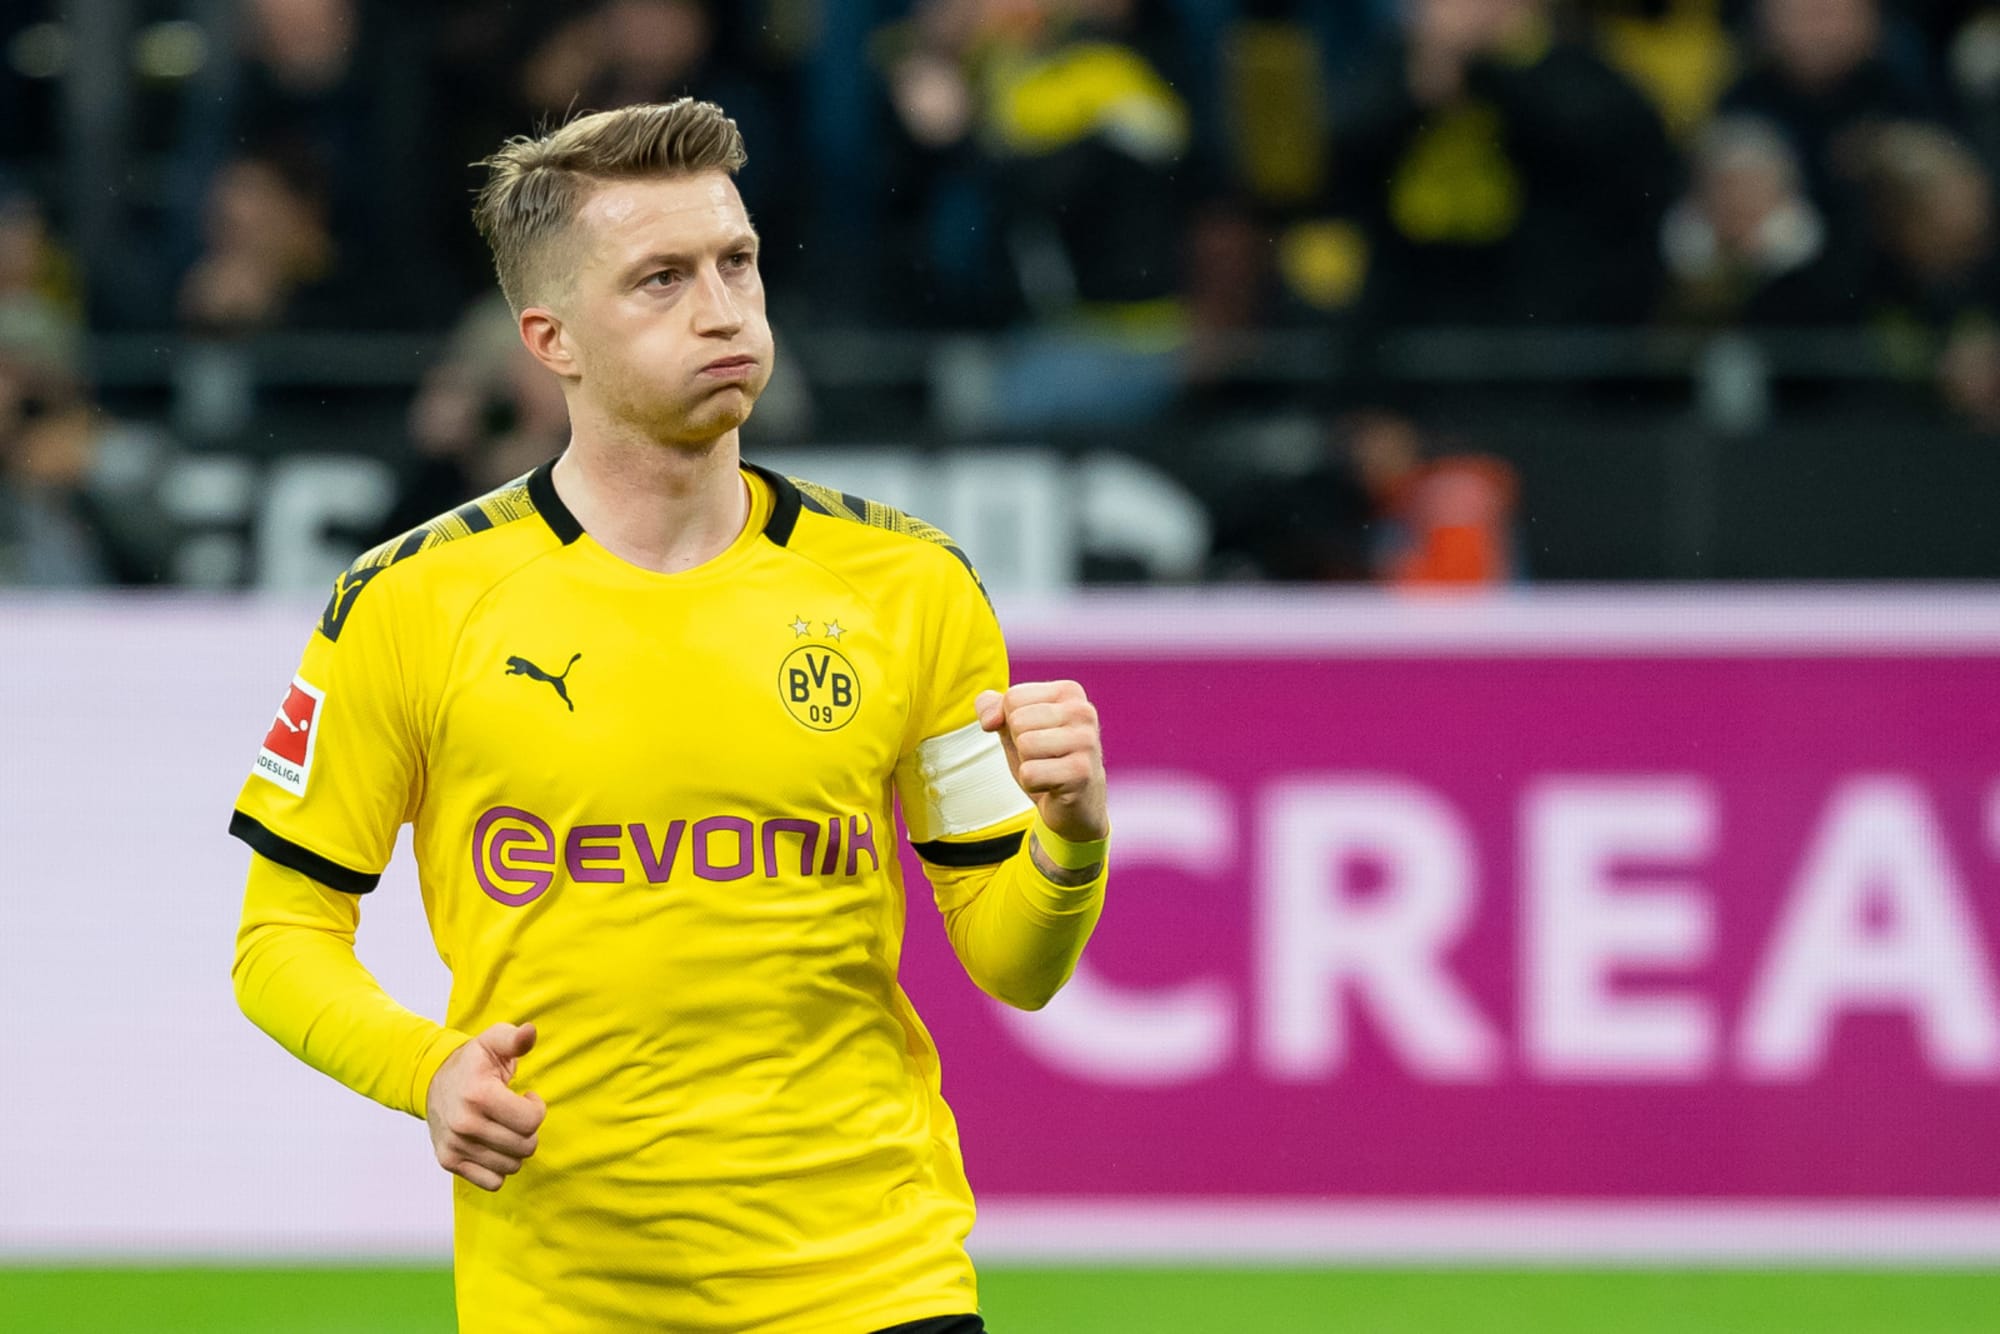 How the absence of Marco Reus affected Borussia Dortmund last season